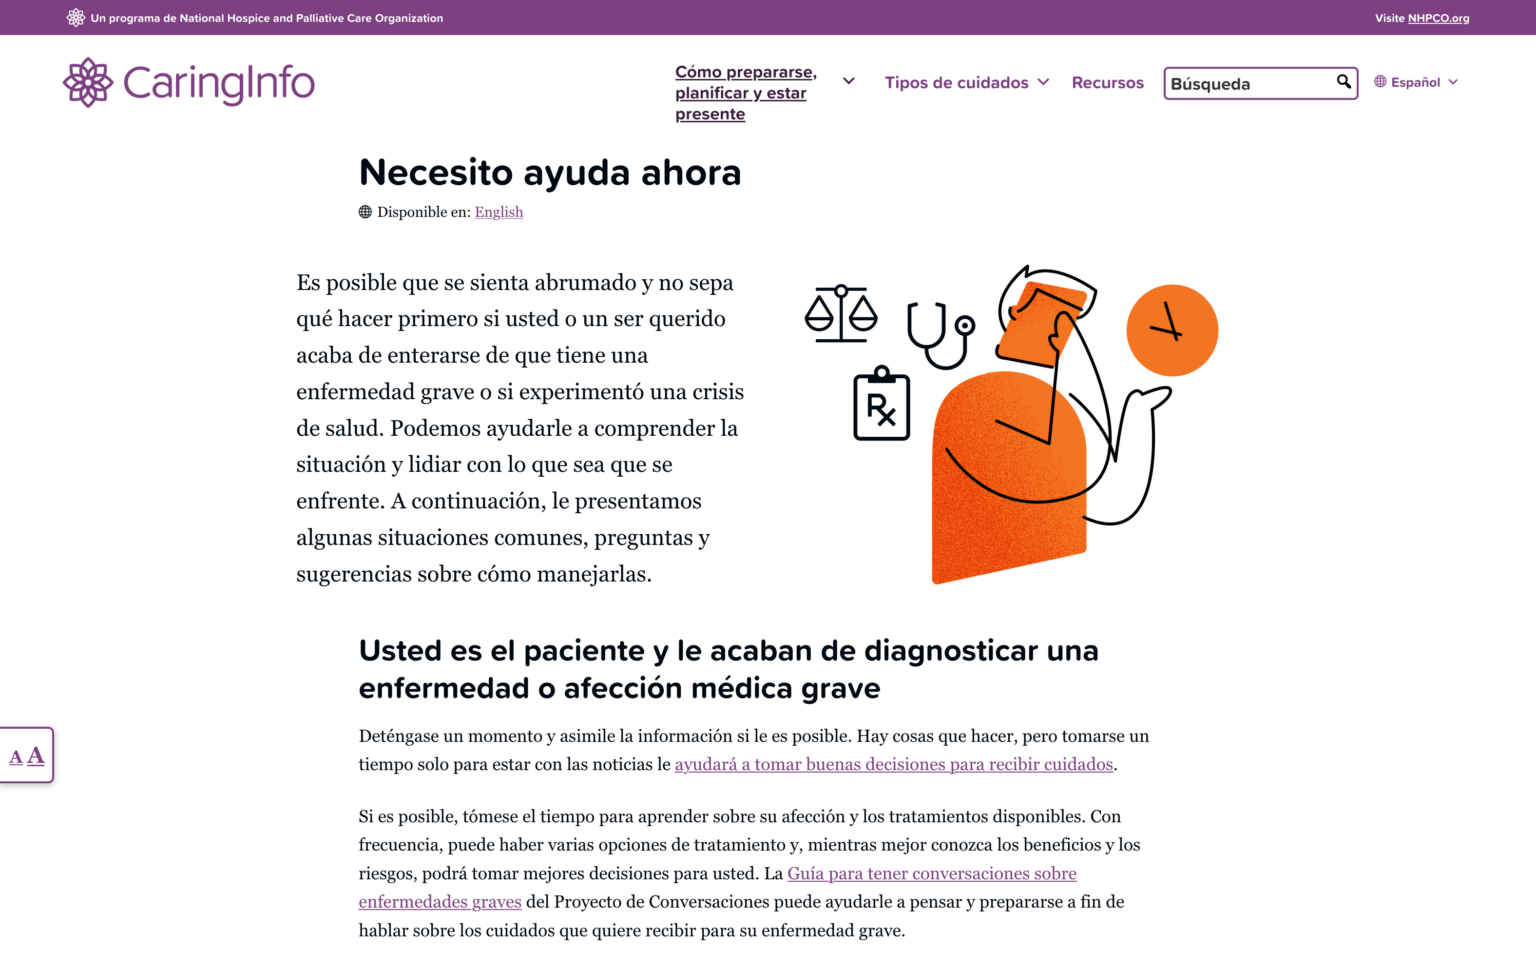 The CaringInfo page around getting immediate help, translated in to Spanish.